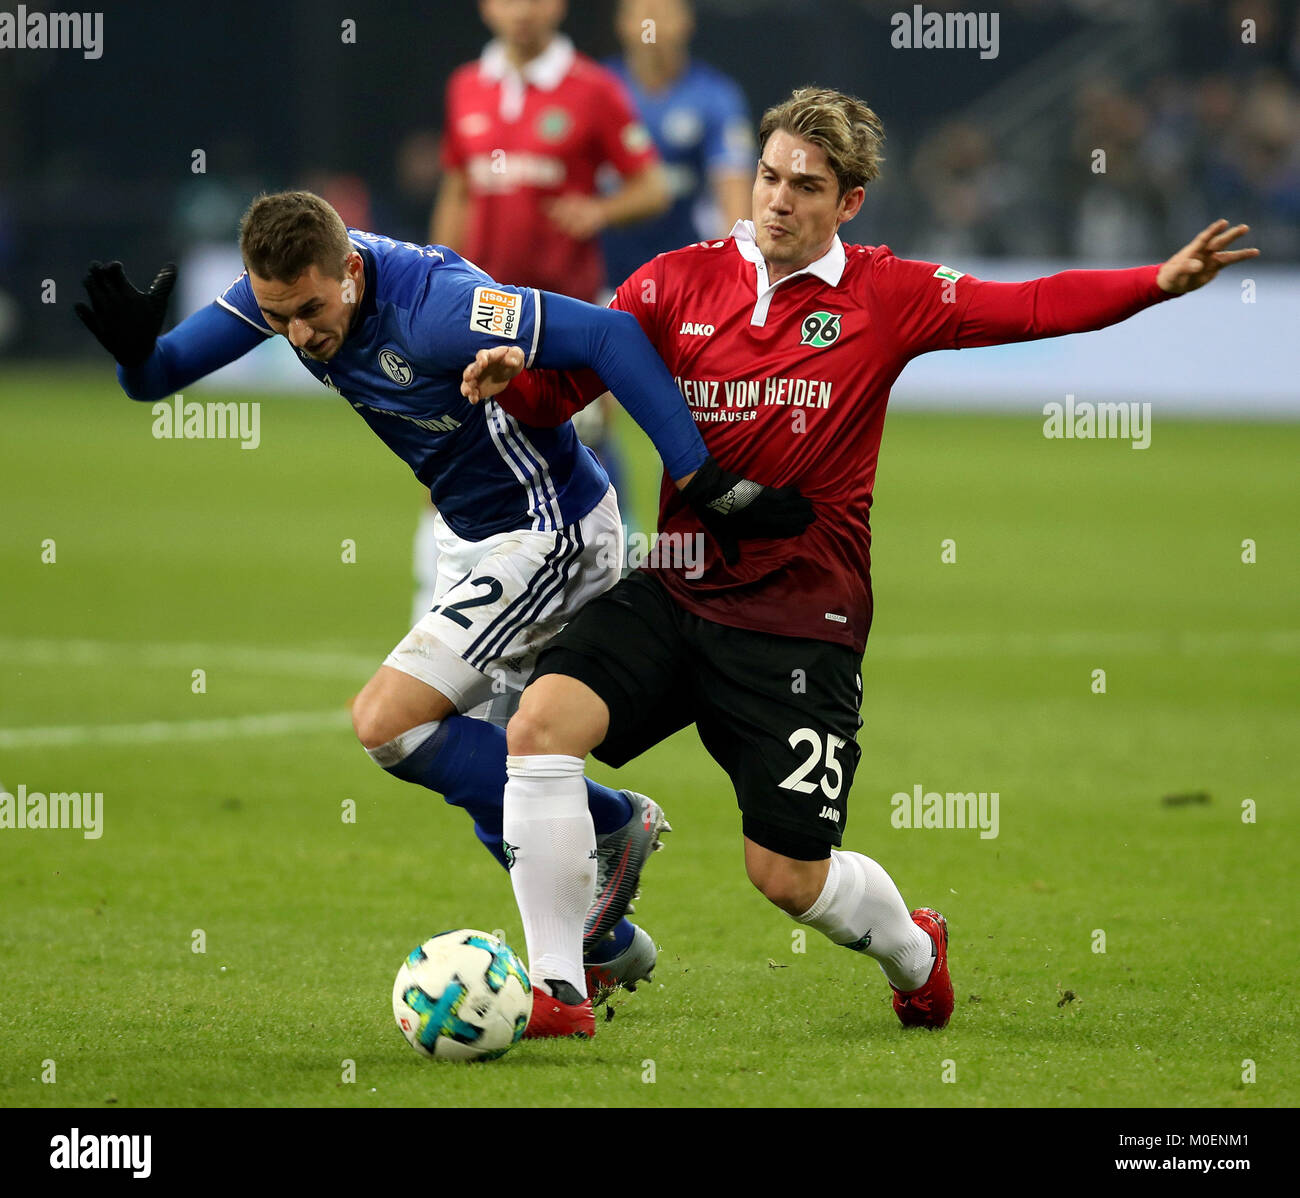 Gelsenkirchen, Germany. 21st Jan, 2018. Oliver Sorg (R) of Hannover and Marko Pjaca of Schalke battle for the ball during the Bundesliga match between FC Schalke 04 and Hannover 96 at Veltins-Arena in Gelsenkirchen, Germany, January 21, 2018. Credit: Joachim Bywaletz/Xinhua/Alamy Live News Stock Photo